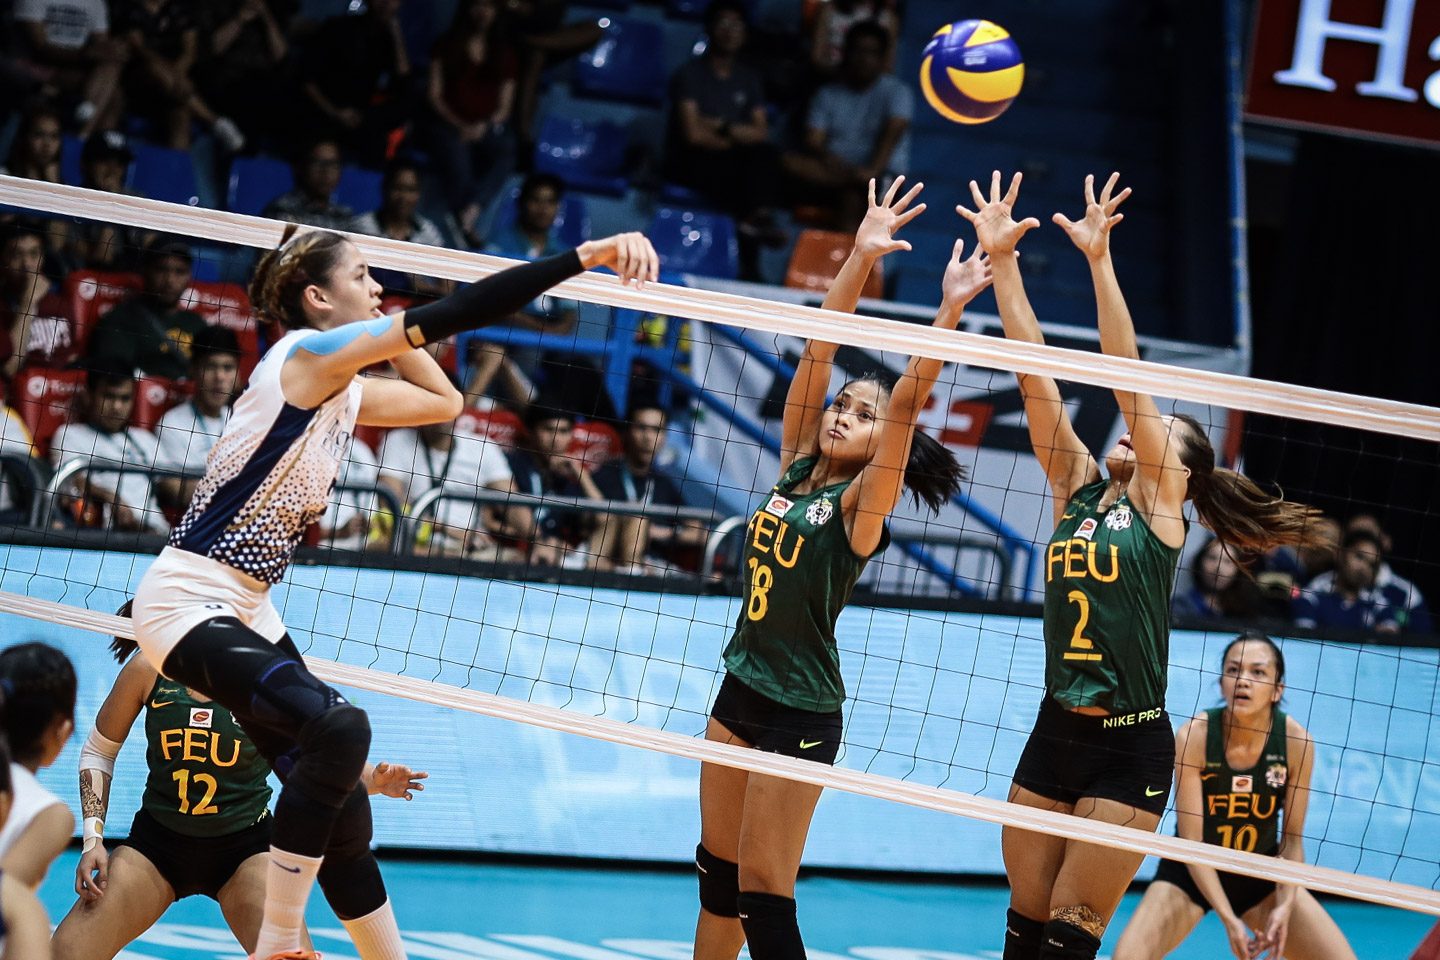 Pascua’s second set frustration turns it around in FEU to beat NU